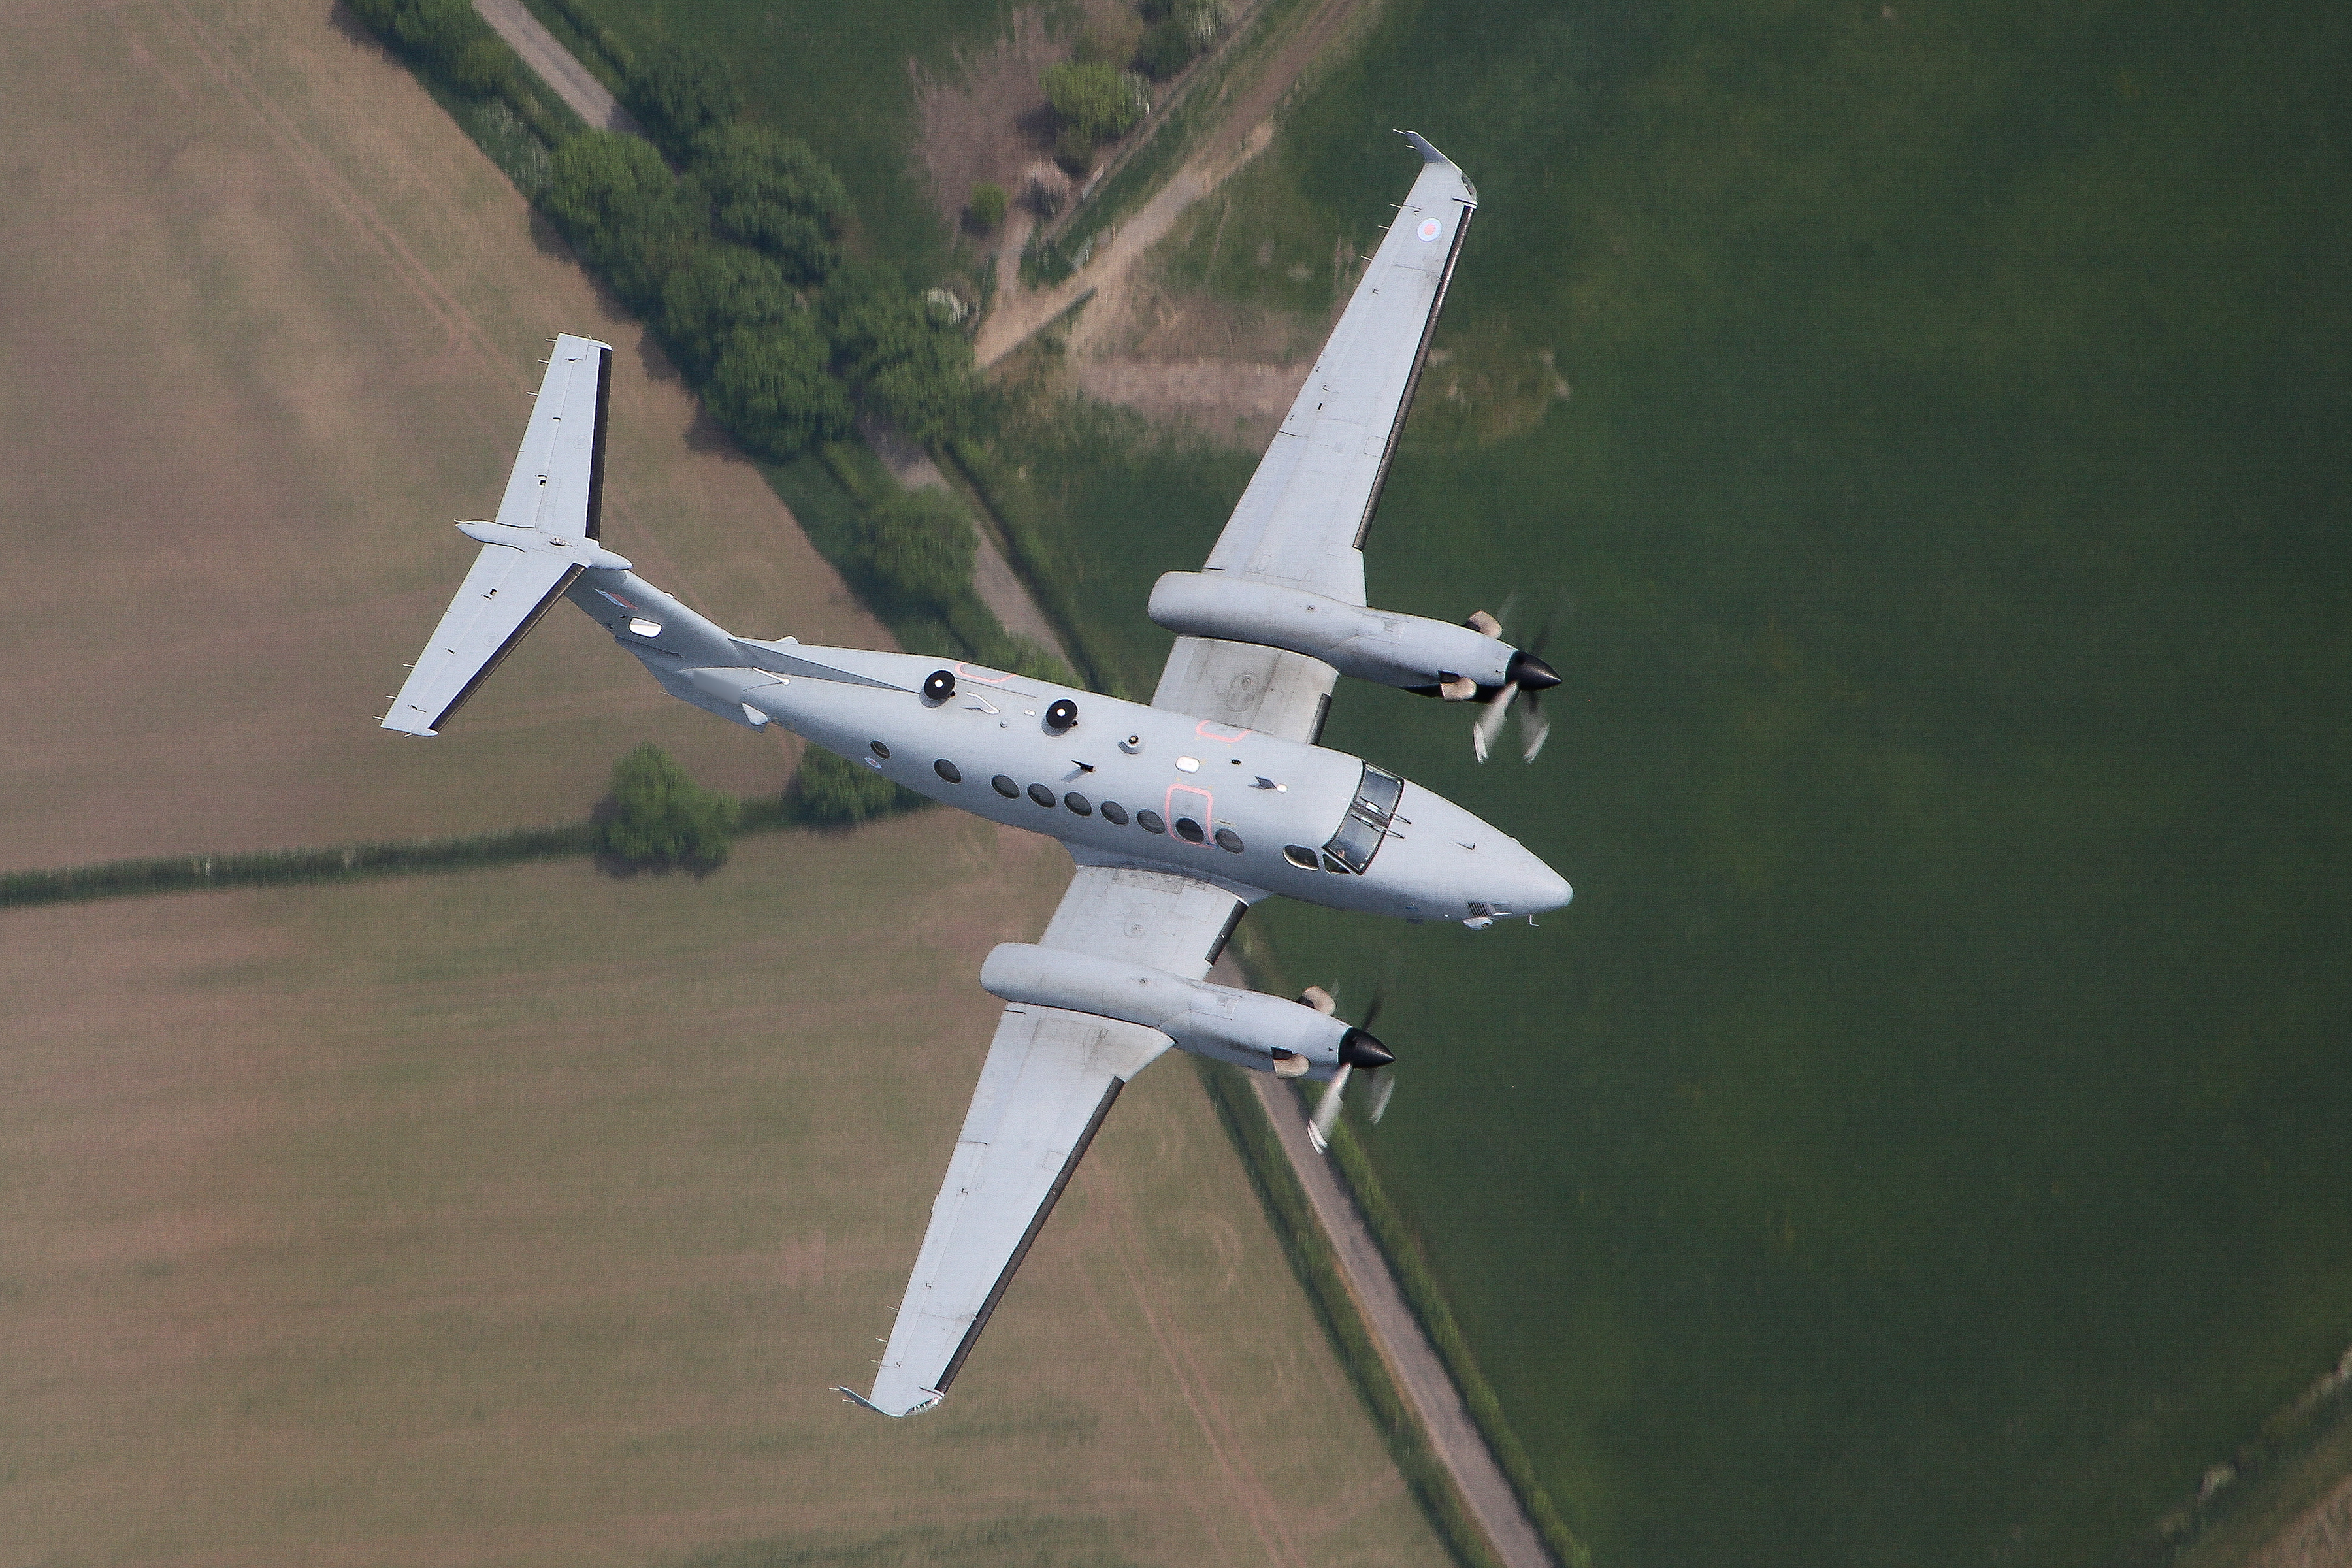 Image shows an aerial view of the RAF Shadow aircraft in flight.